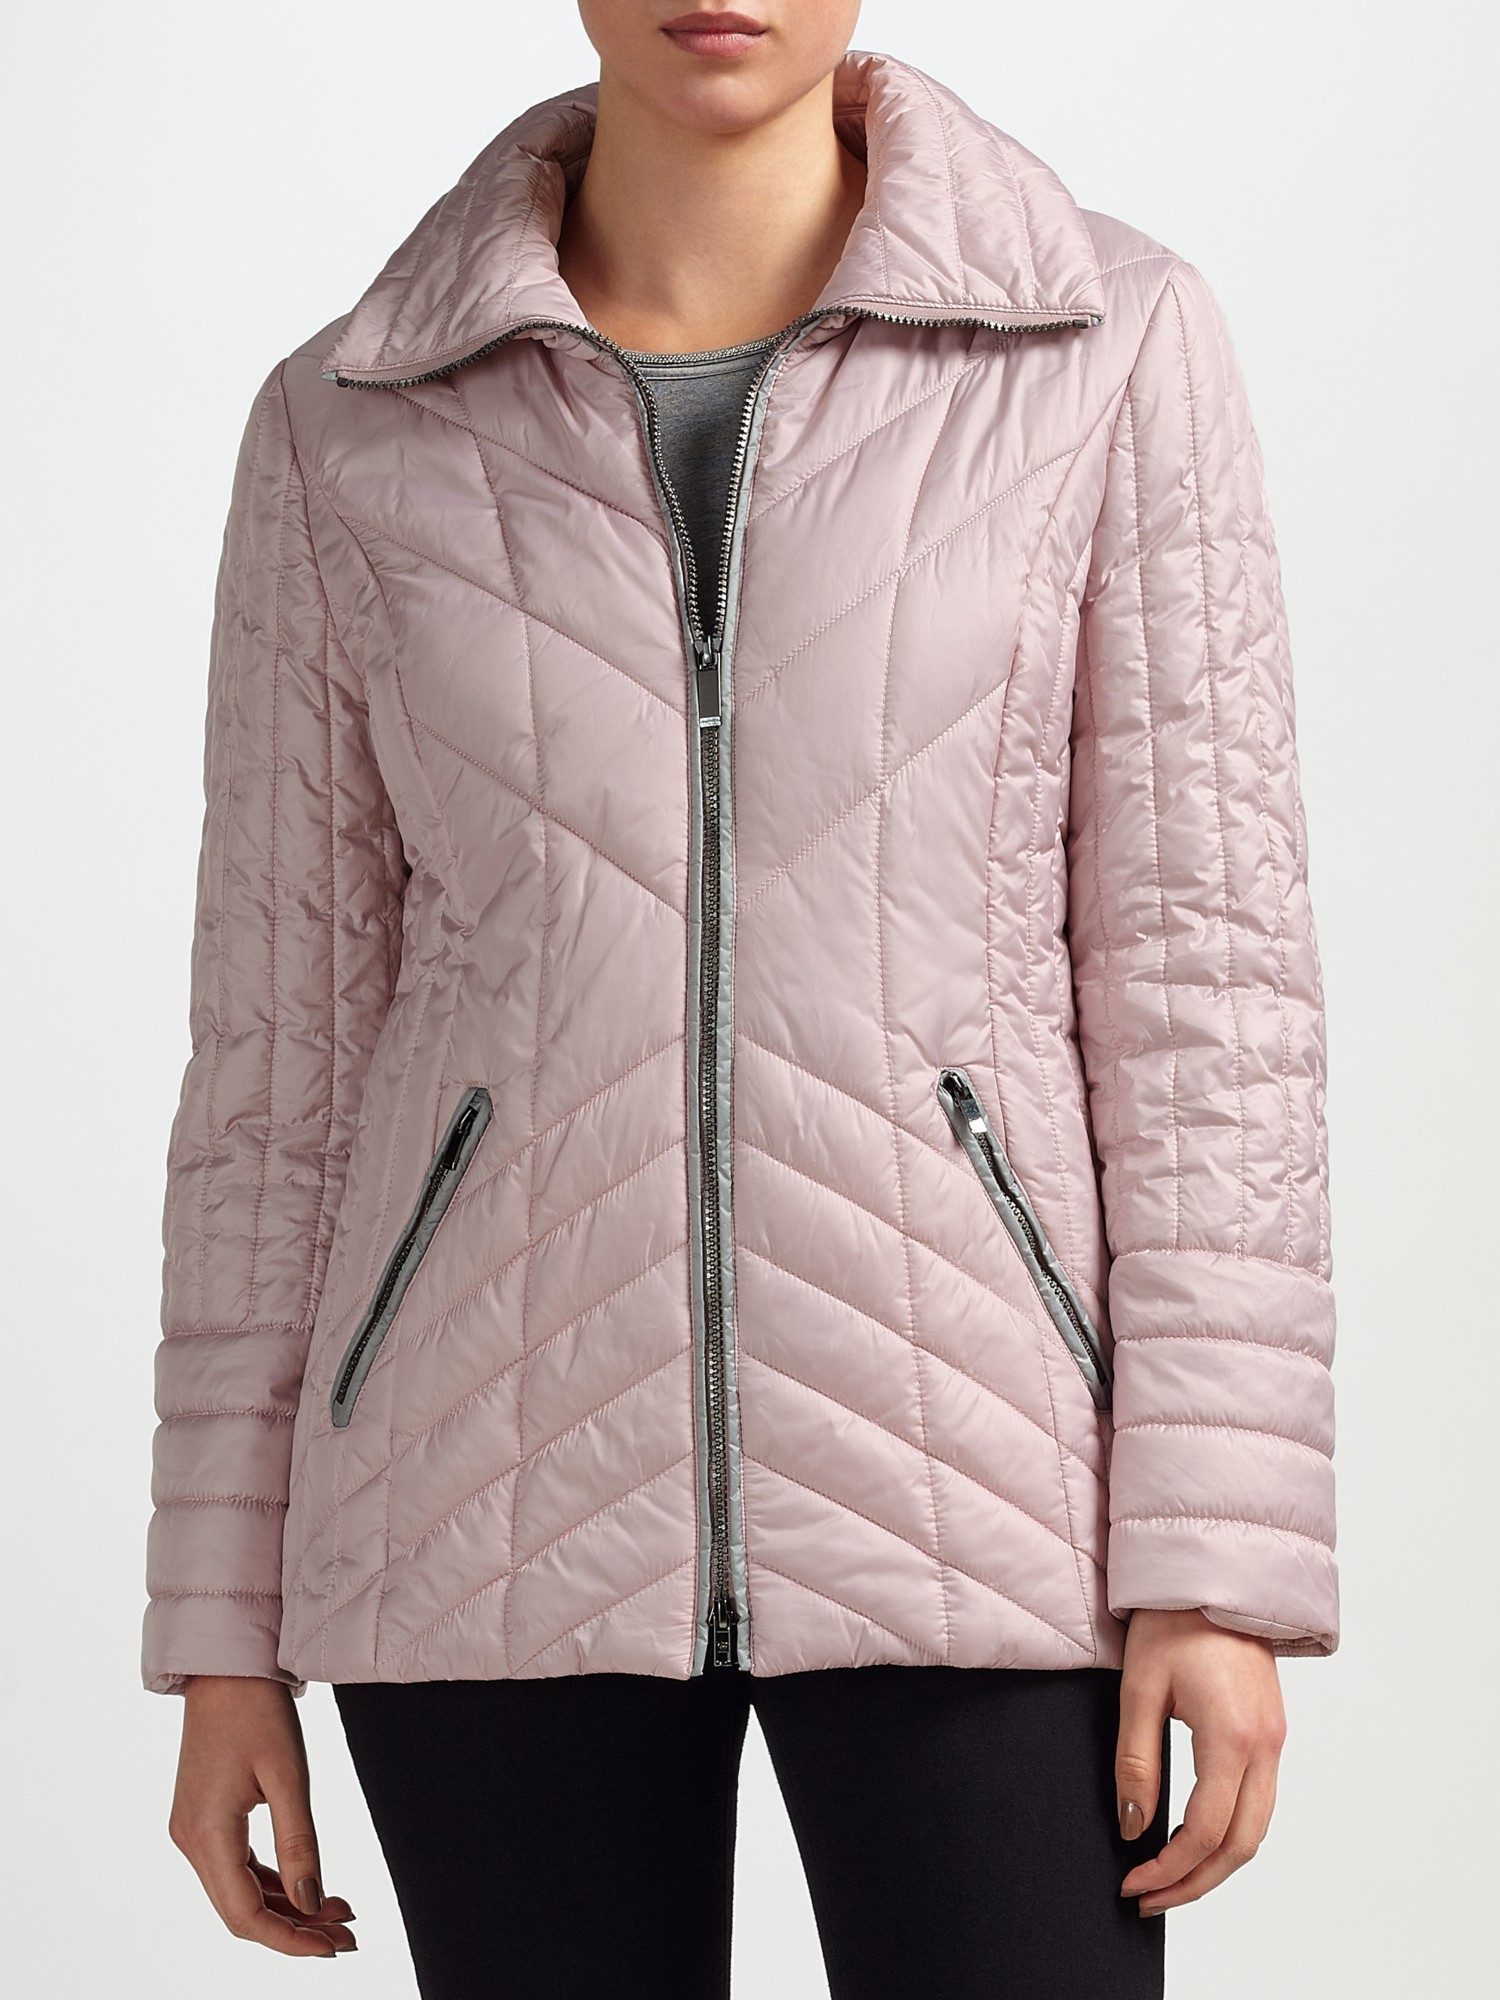 Gerry Weber Quilted Jacket in Pink - Lyst